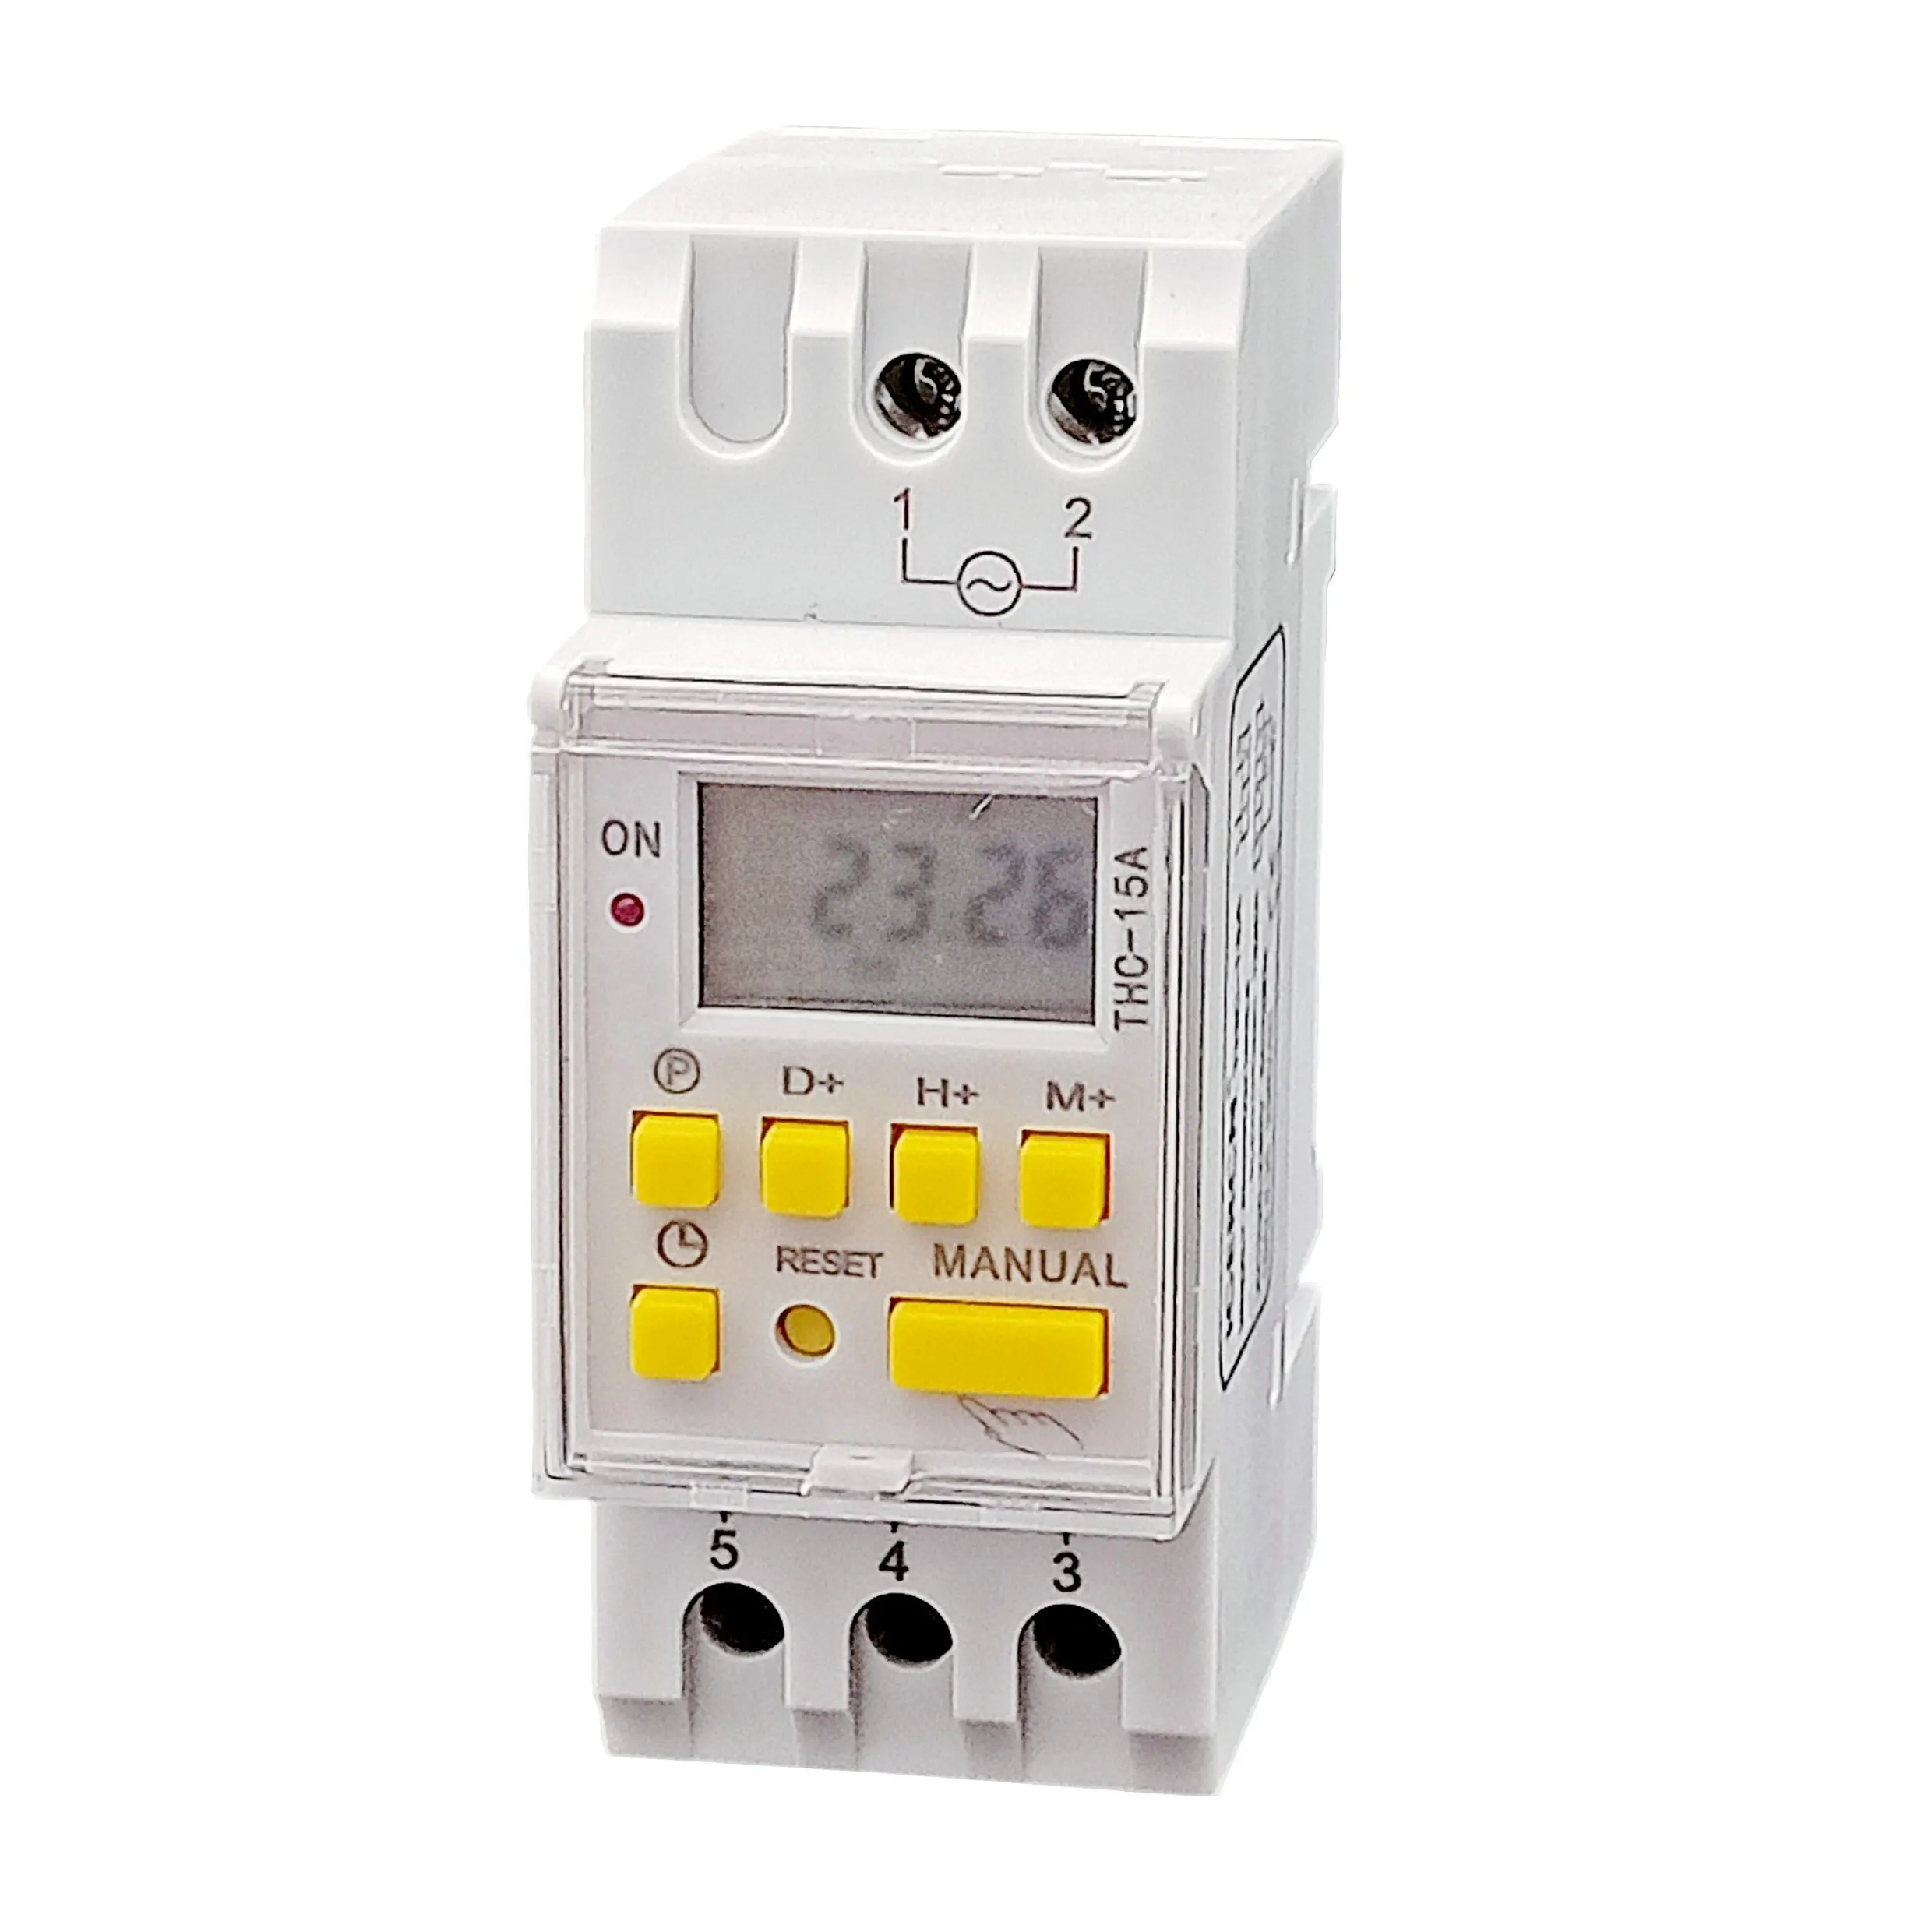 Programmable Time Switch Time Control Switch THC-15A 16amp 24VDC Digital Timer Switch Programmable 16ON 16OFF Programms